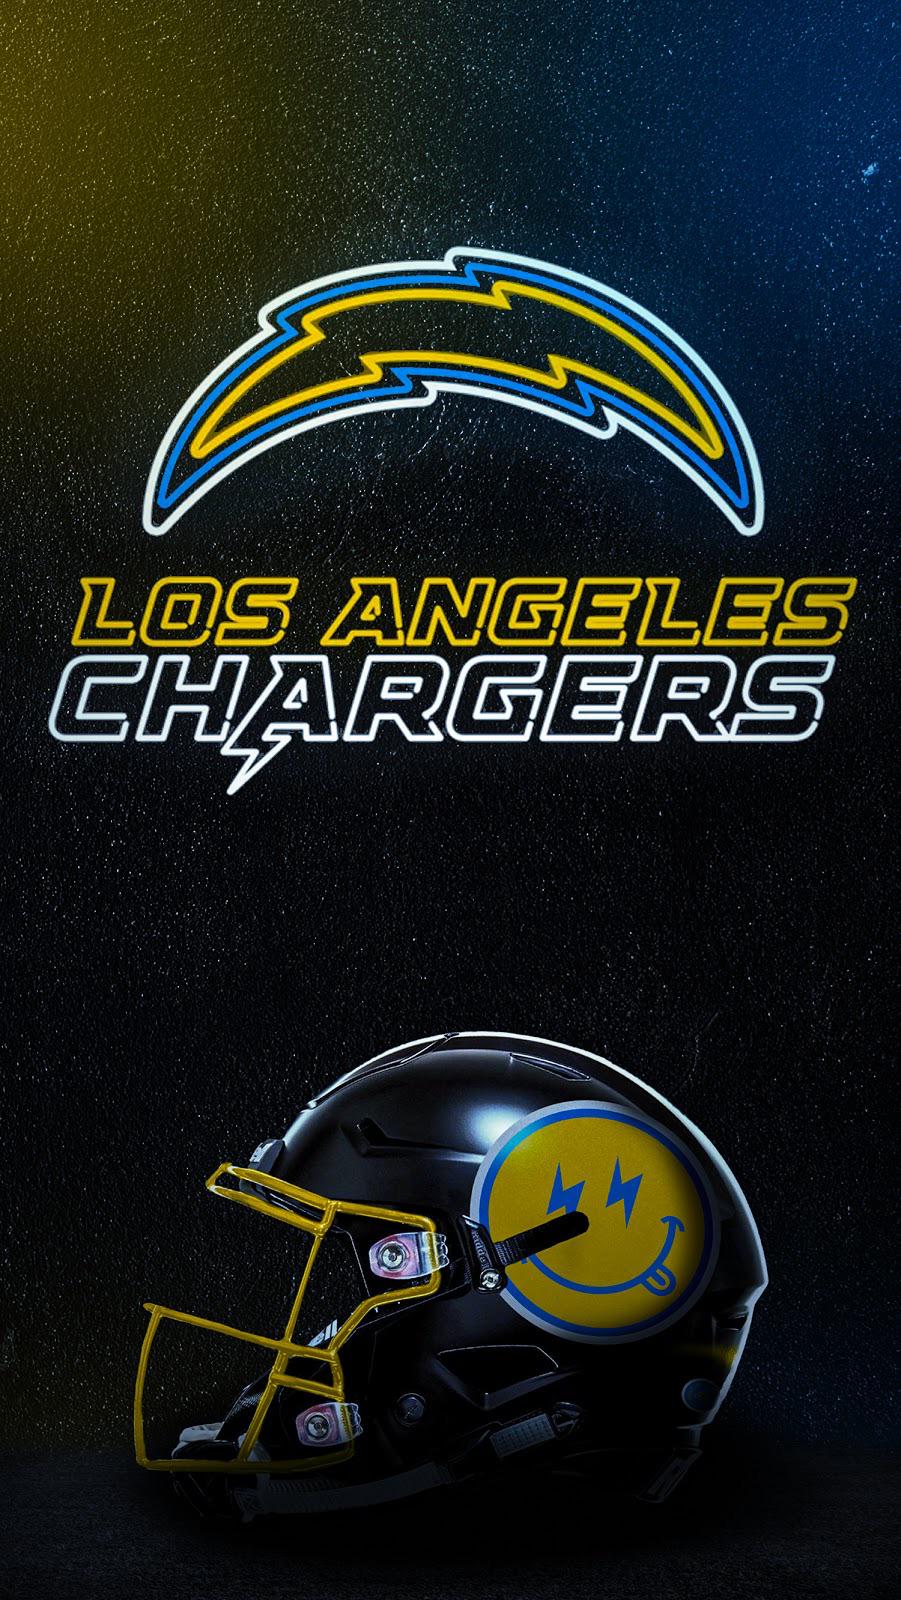 Background Chargers Wallpaper Discover more American Chargers Football  Los Angeles Metropo  Los angeles chargers Los angeles chargers logo  Chargers football